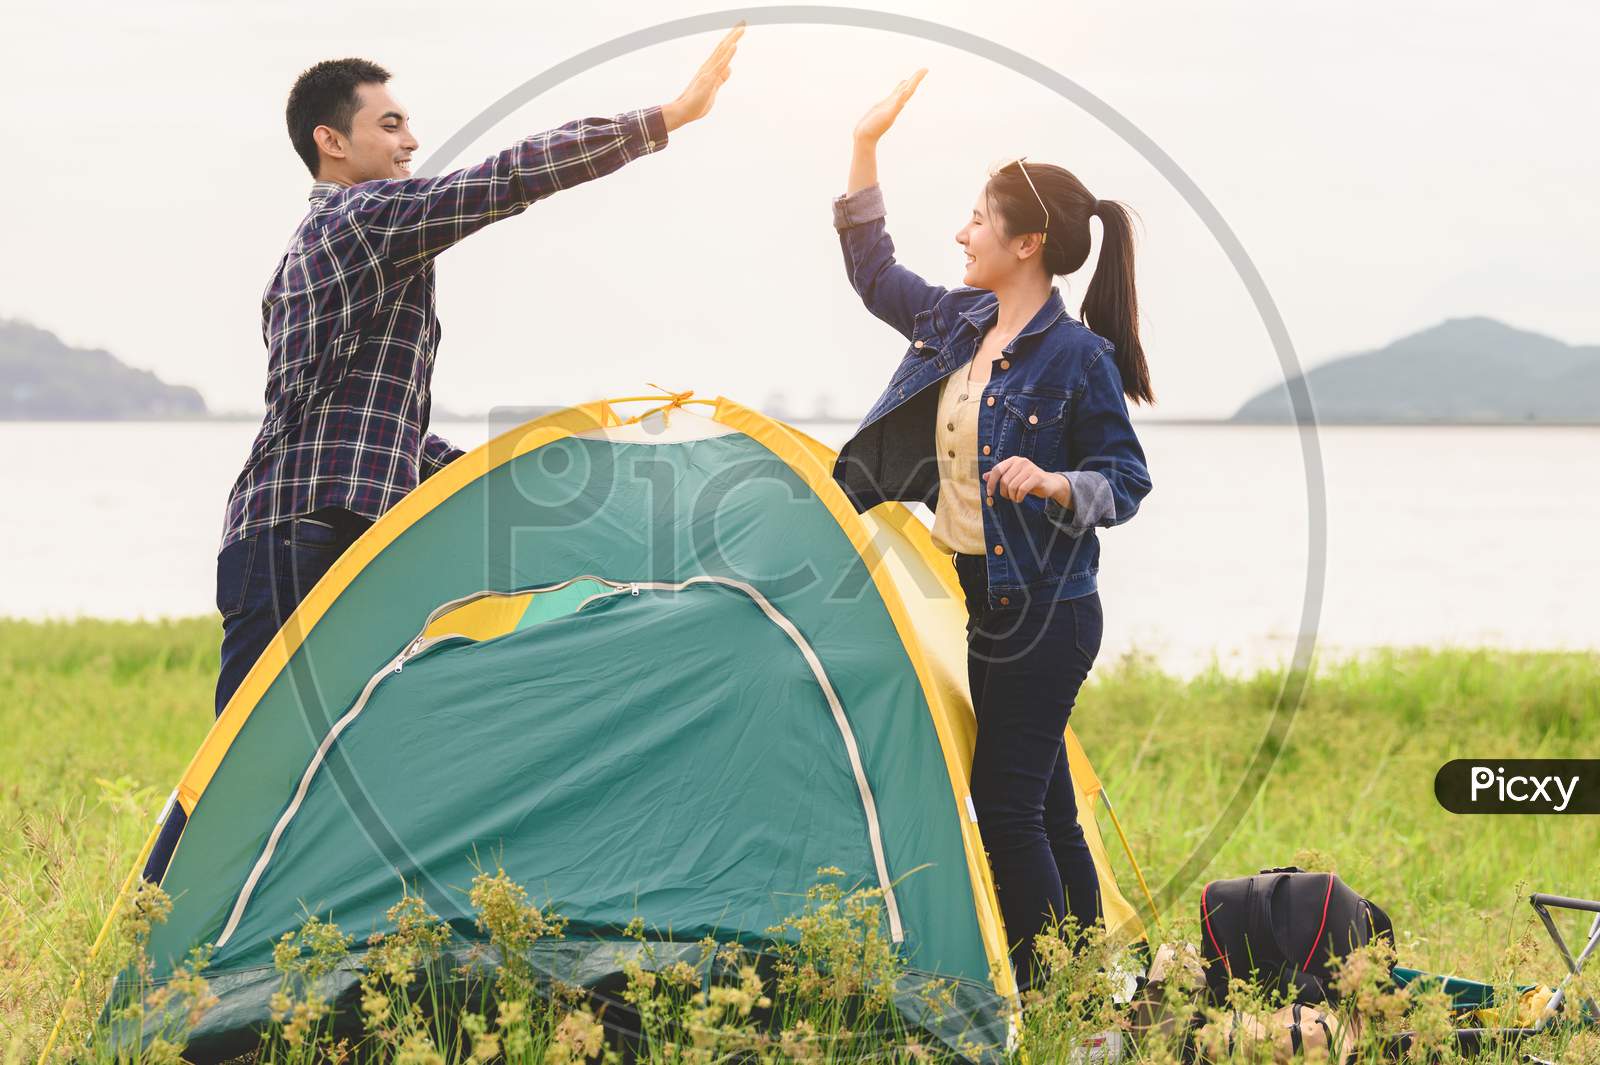 Two Asian Couples Finished Pitch And Doing High Five For Stay In Camping Tent  Meadow Overnight Honeymoon Picnic. People Lifestyle And Valentine Day Love Concept. Nature Travel Relaxation Activity